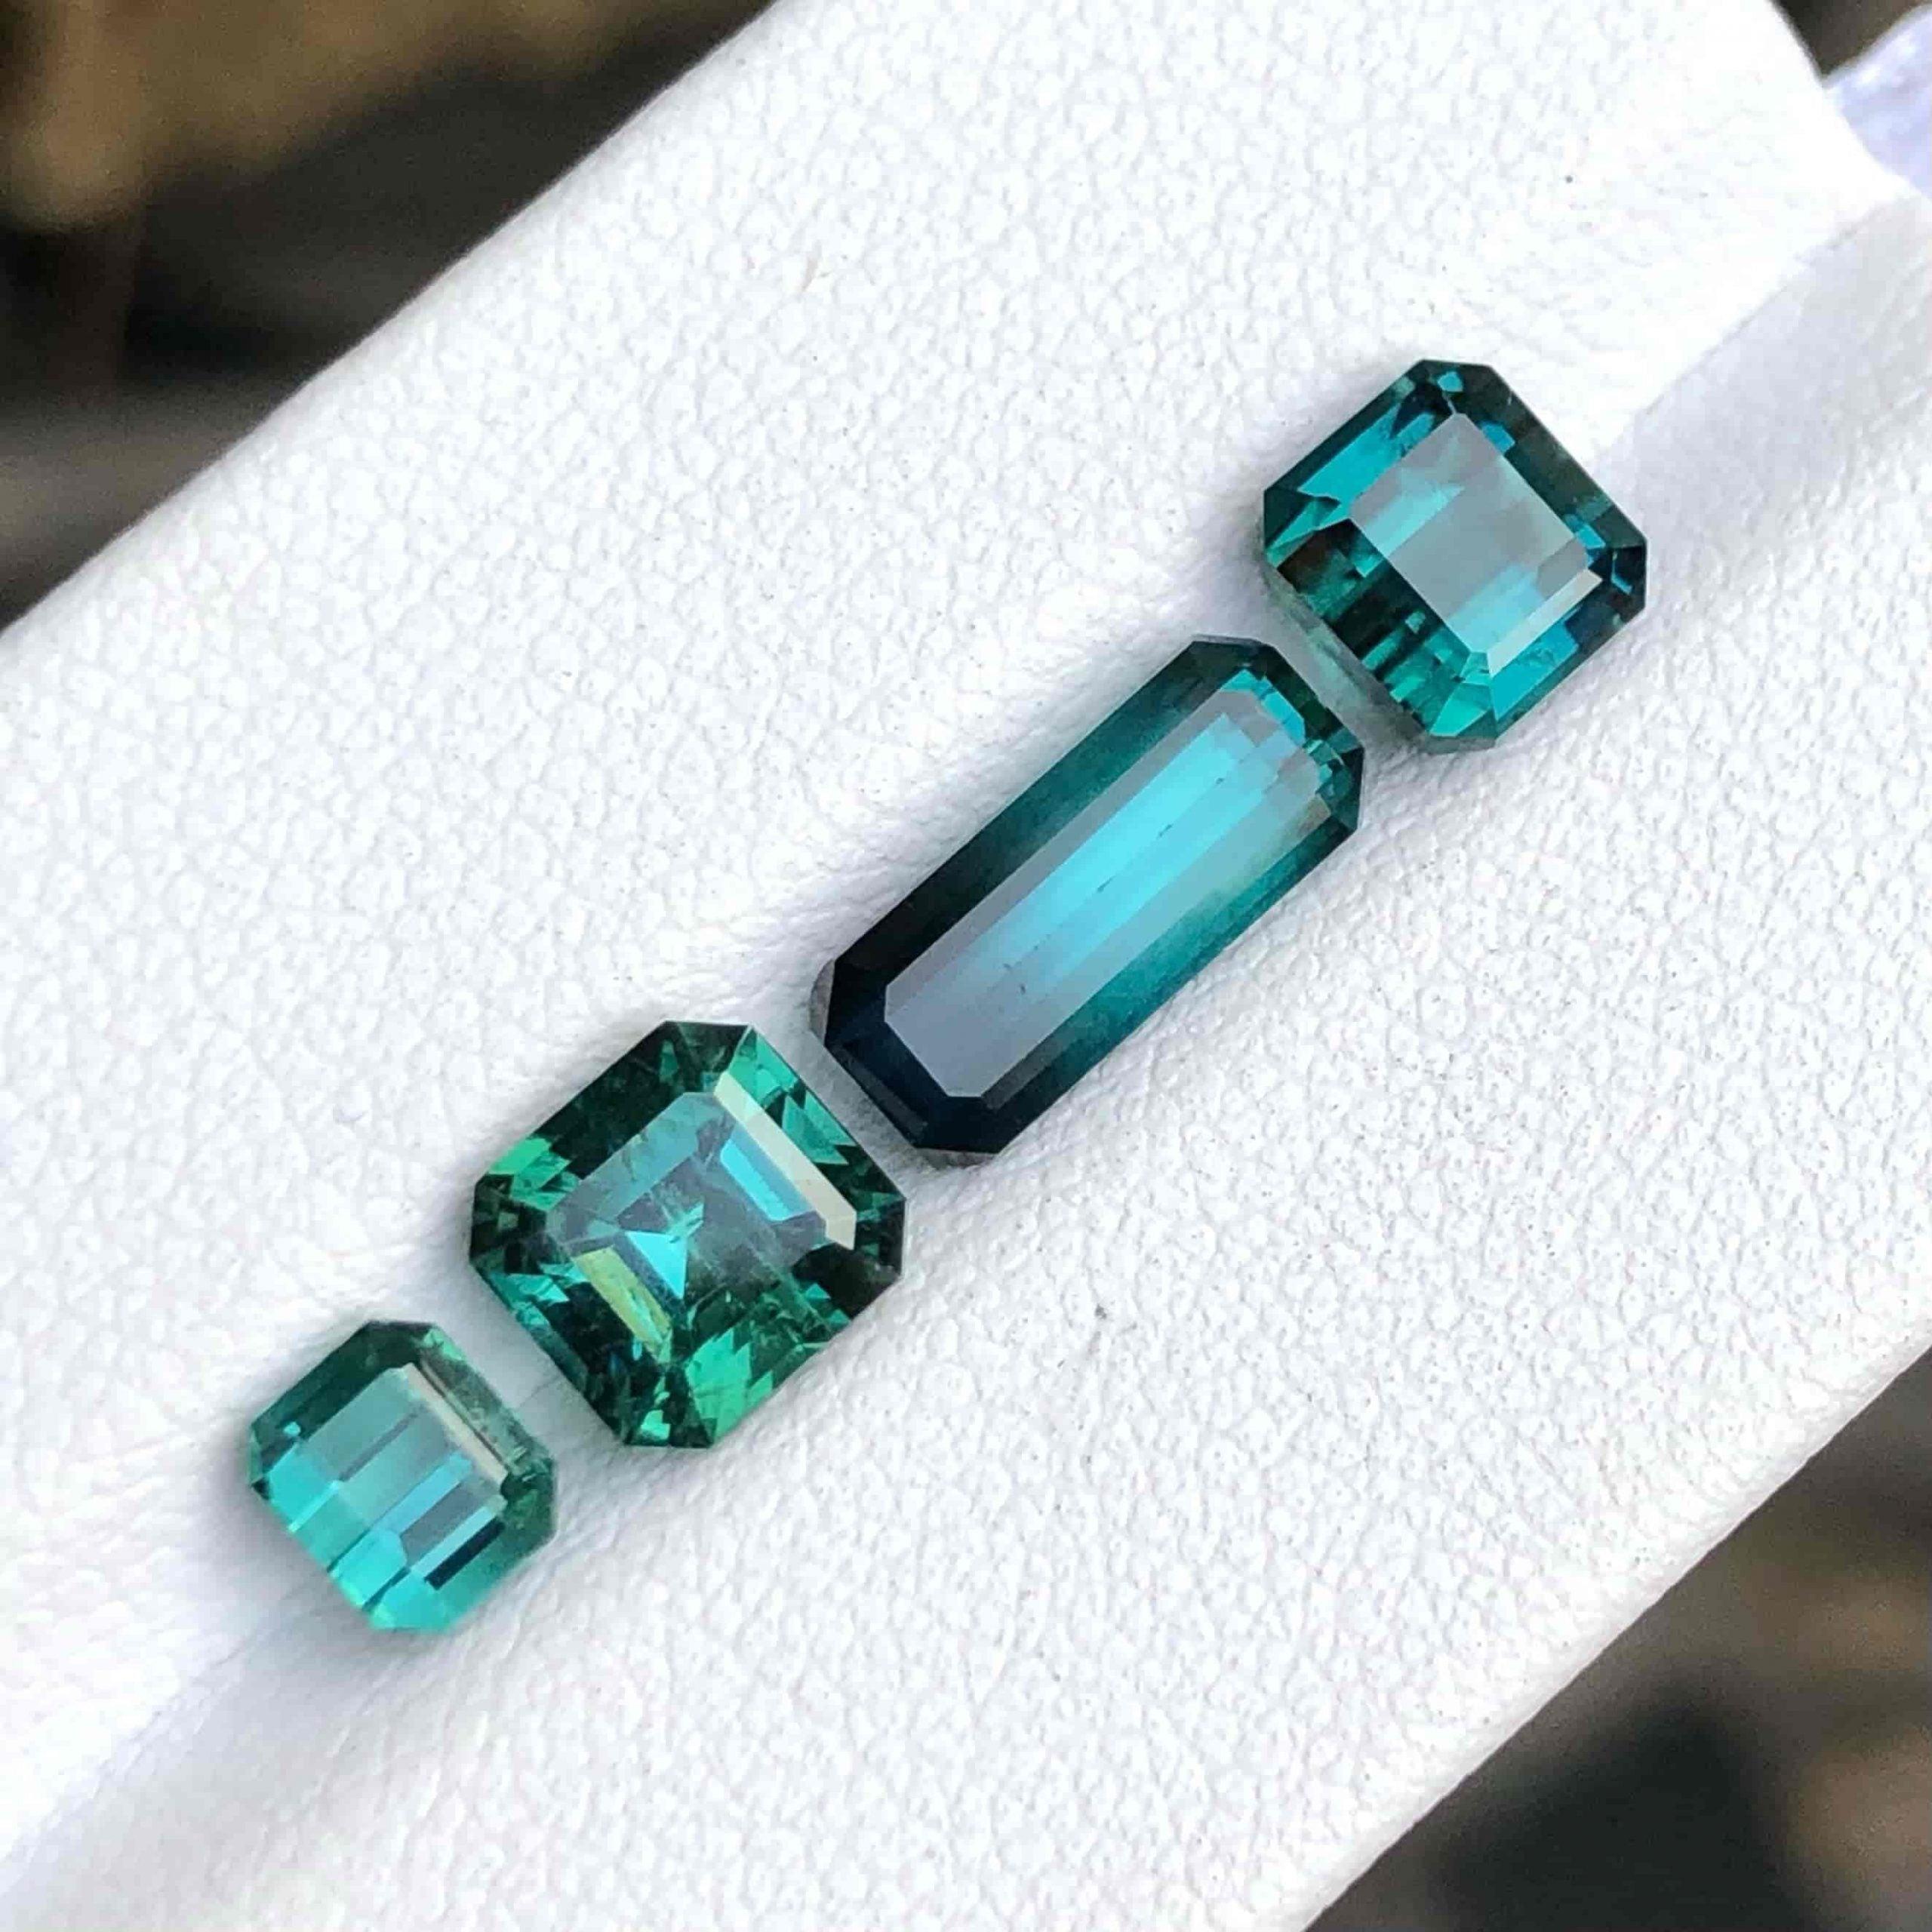 6.25 carats Greenish Blue Tourmaline Set is available for sale at wholesale price from Afghanistan.

Product Information:
GEMSTONE TYPE:	Greenish Blue Tourmaline Set
WEIGHT:	6.25 carats
WEIGHT RANGE:	2.15, 1.85, 1.55 and 0.70 carats
CLARITY:	Eye